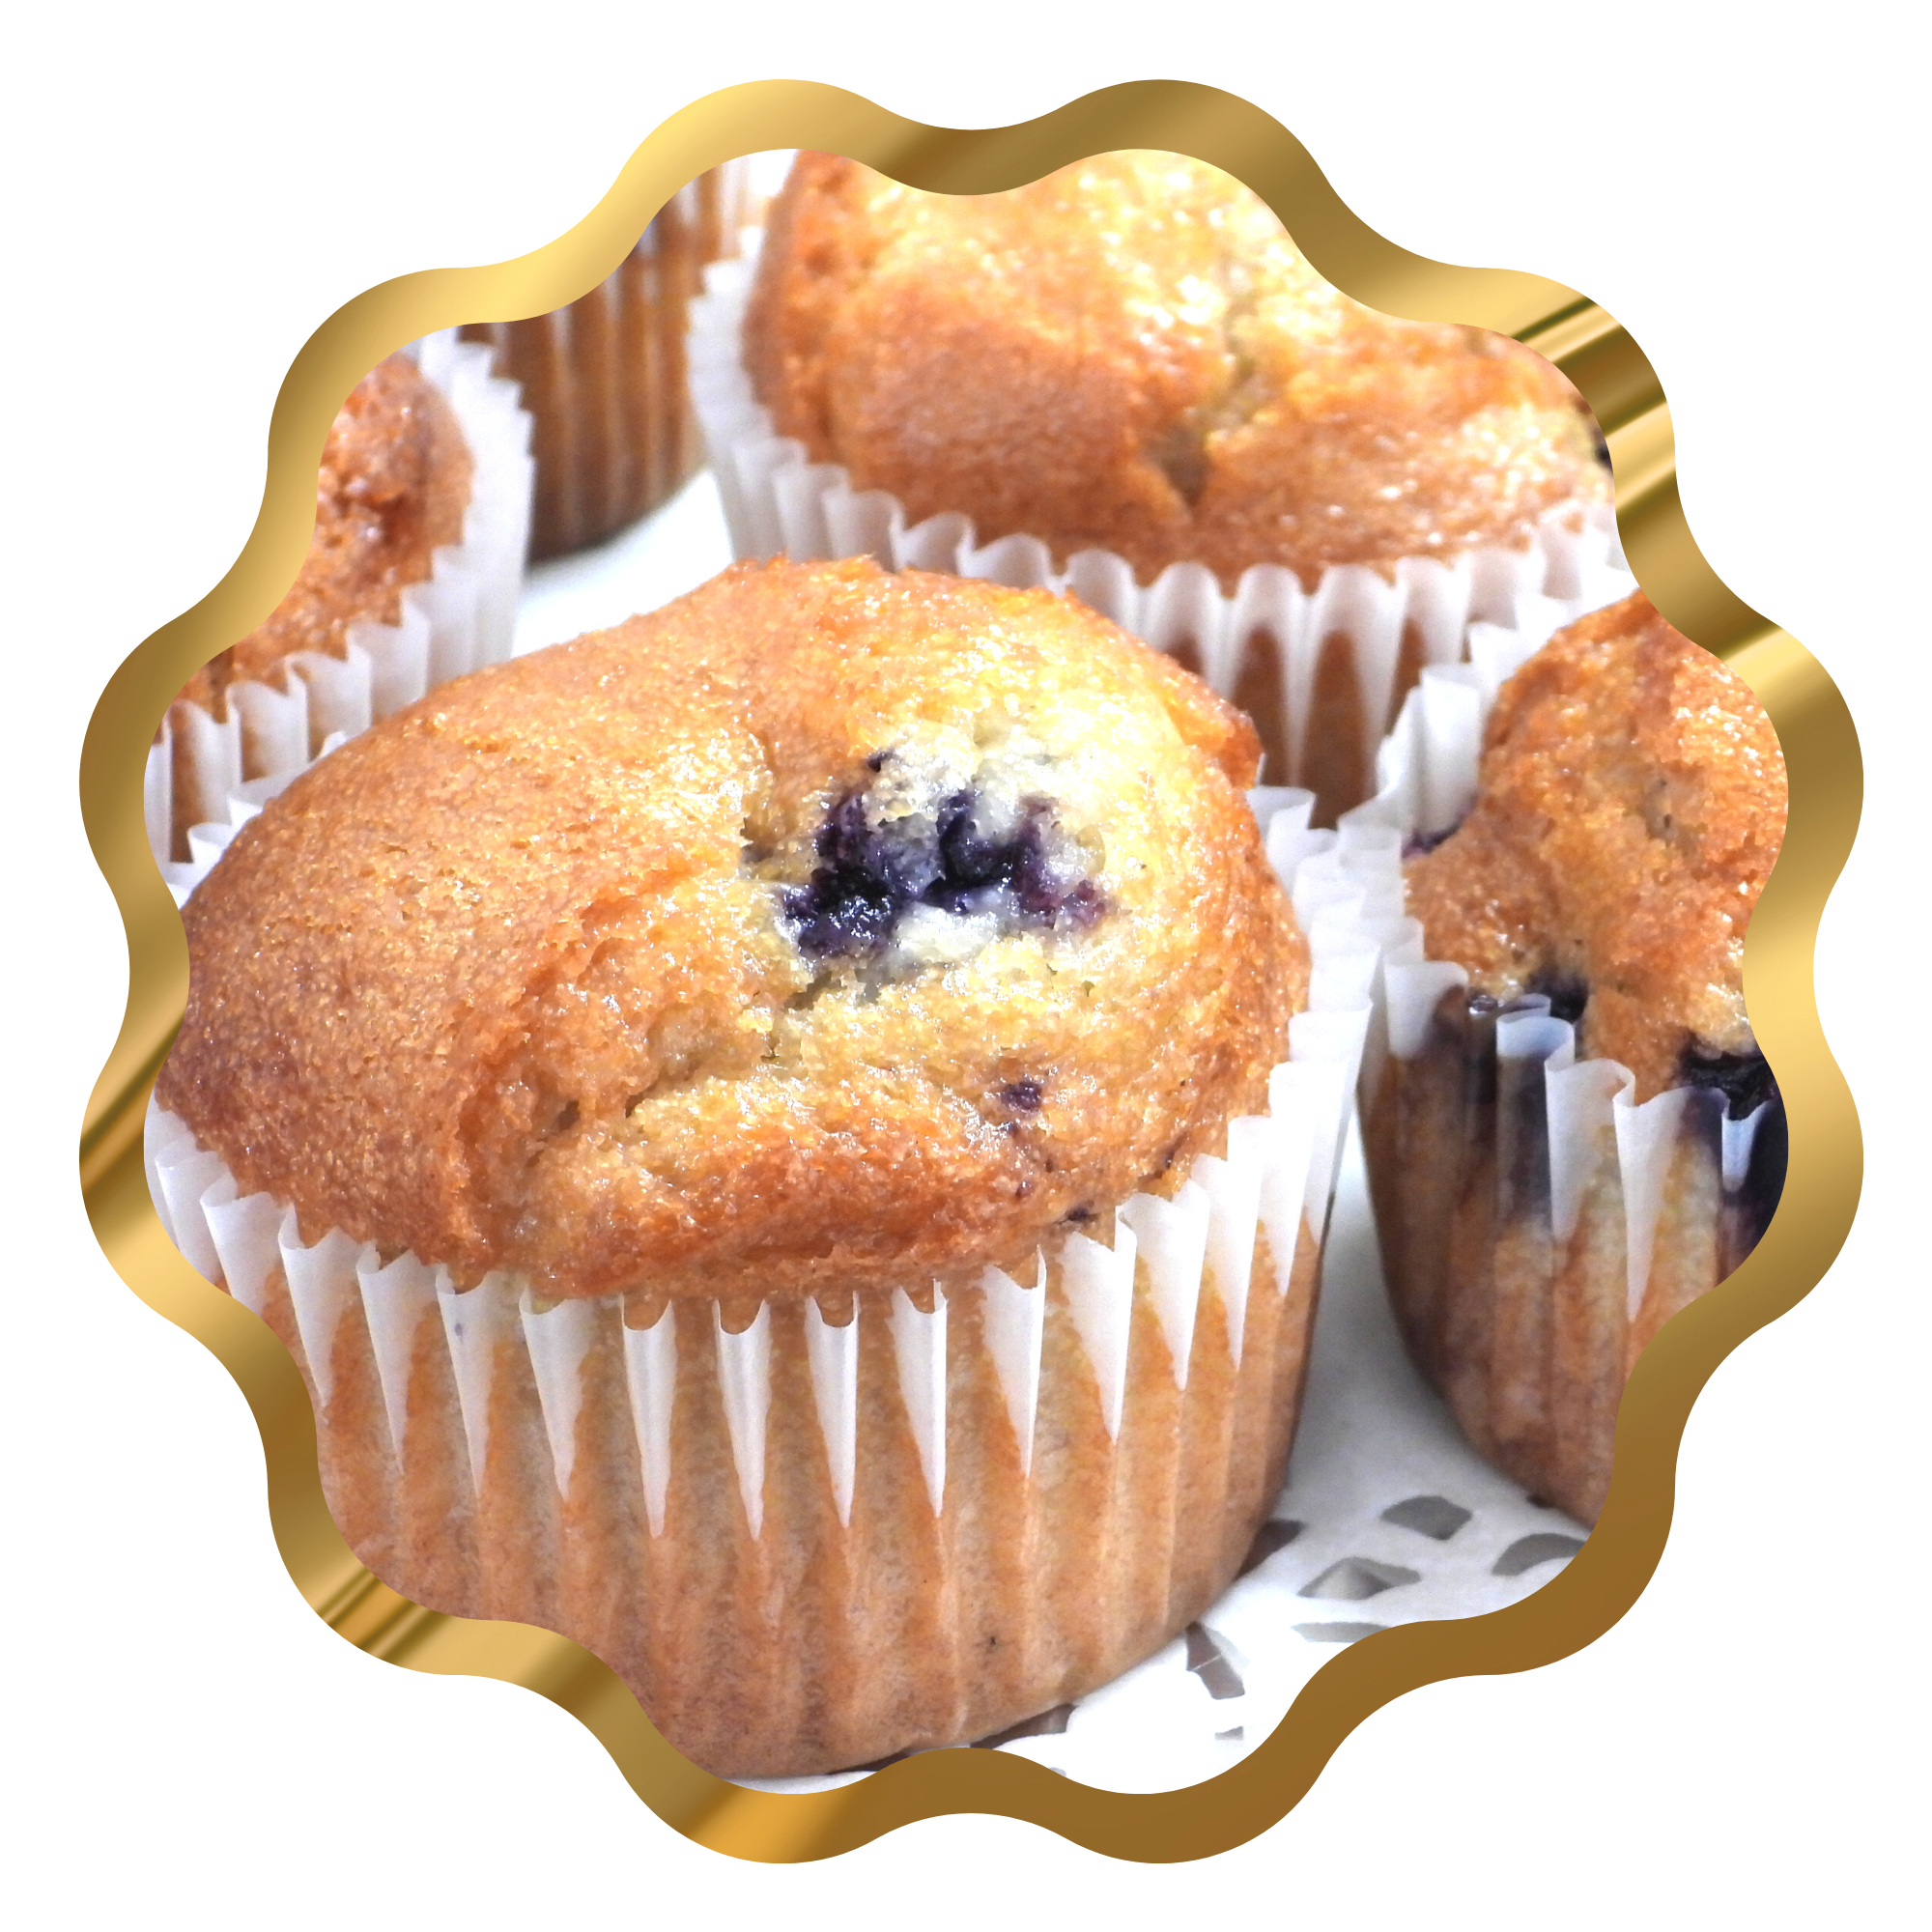 Bakery, local bakery, fresh baked, homemade, cookies, cakes, pies, scones, muffins, treats, sweets, local bake shop, bake shop, café, local café, blueberry muffins, chocolate chip muffins, healthy muffins